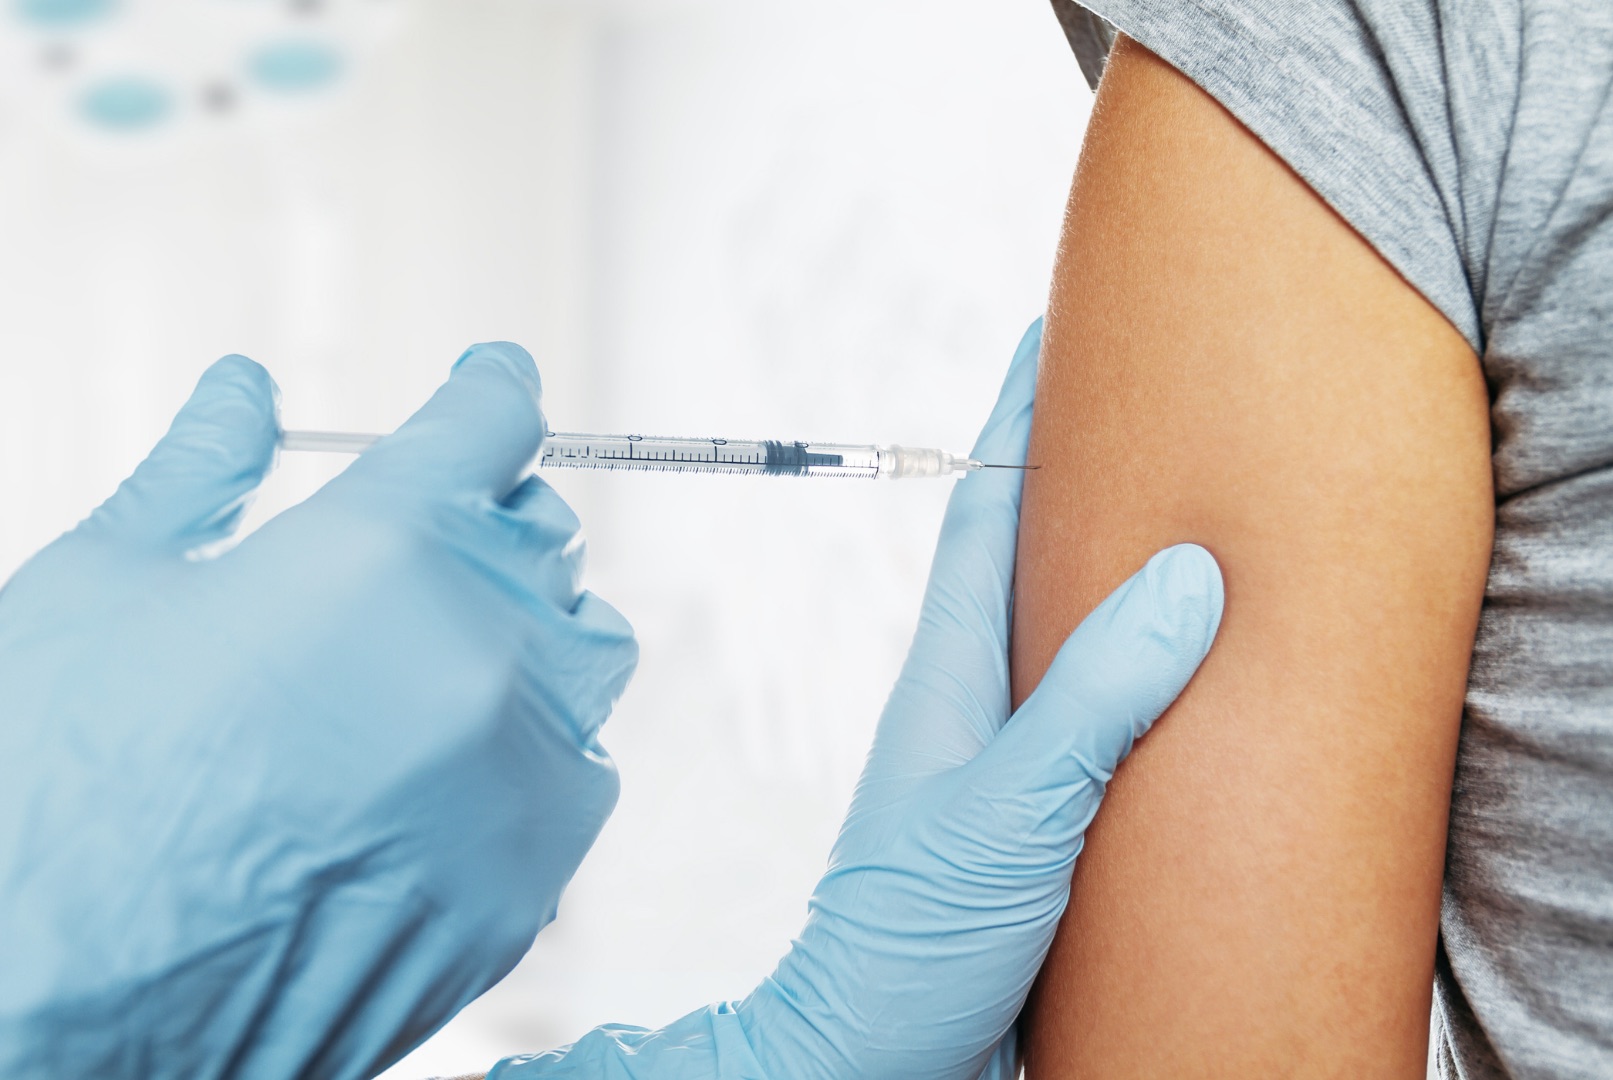 Overcome Fear of NEEDLES AND MEDICAL PROCEDURES